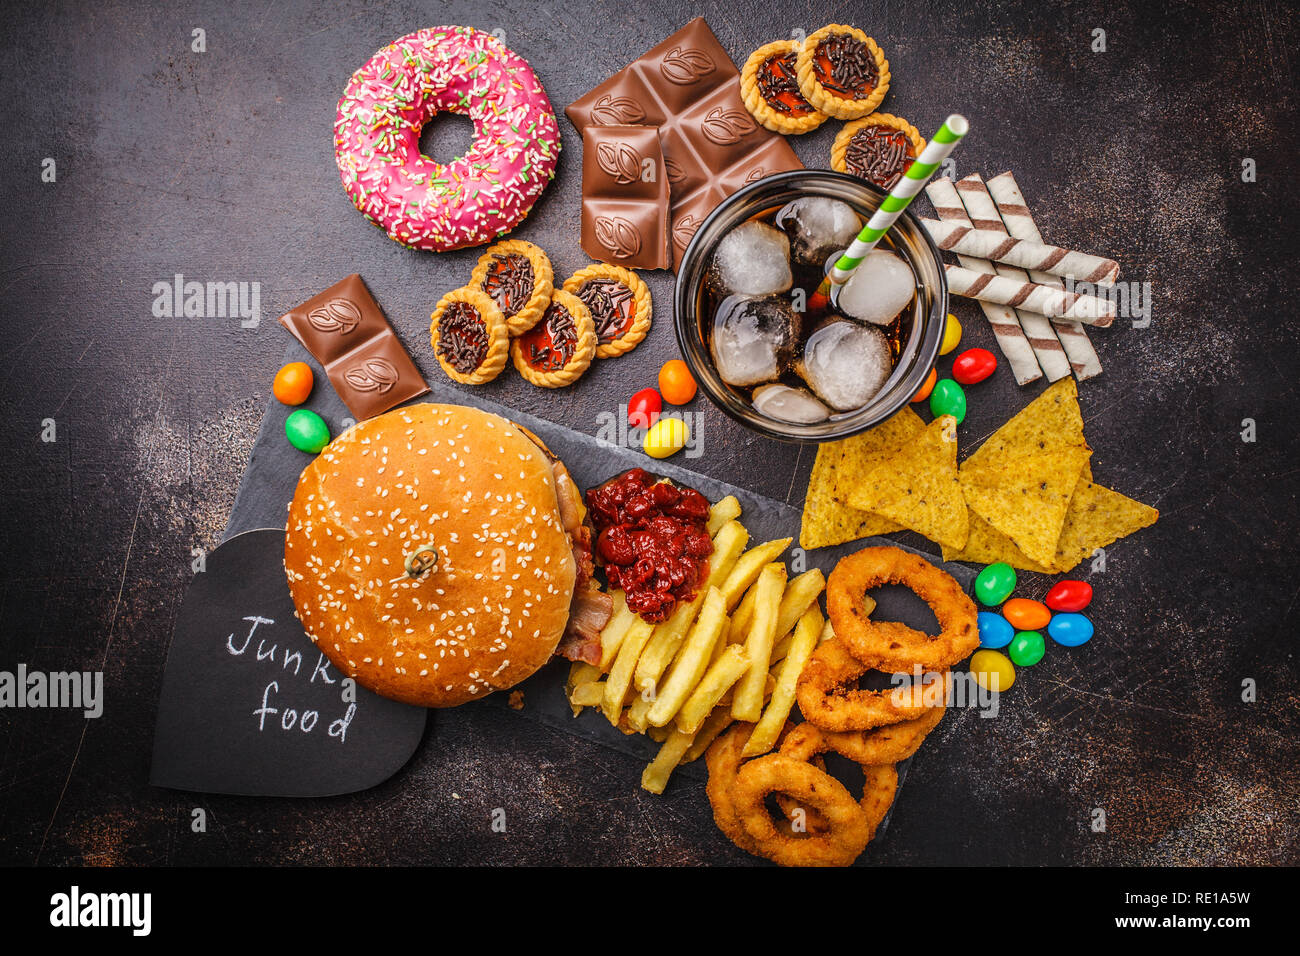 Junk food concept. Unhealthy food background. Fast food and sugar. Burger,  sweets, chips, chocolate, donuts, soda on a dark background Stock Photo -  Alamy